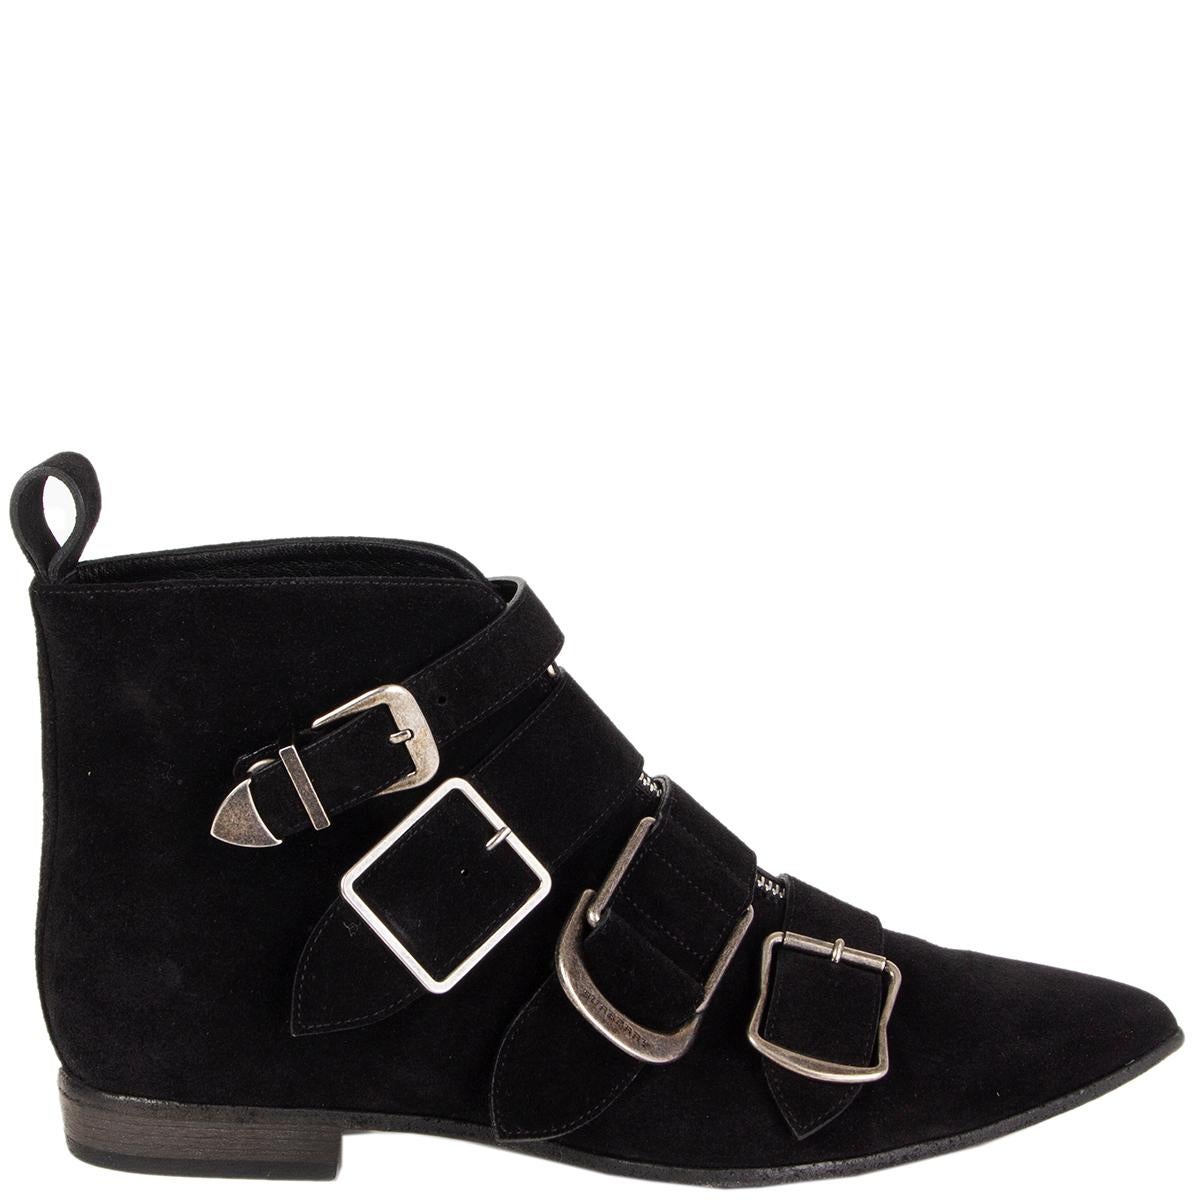 BURBERRY black suede MILNER BUCKLE DETAILS Ankle Boots Shoes 39 For Sale